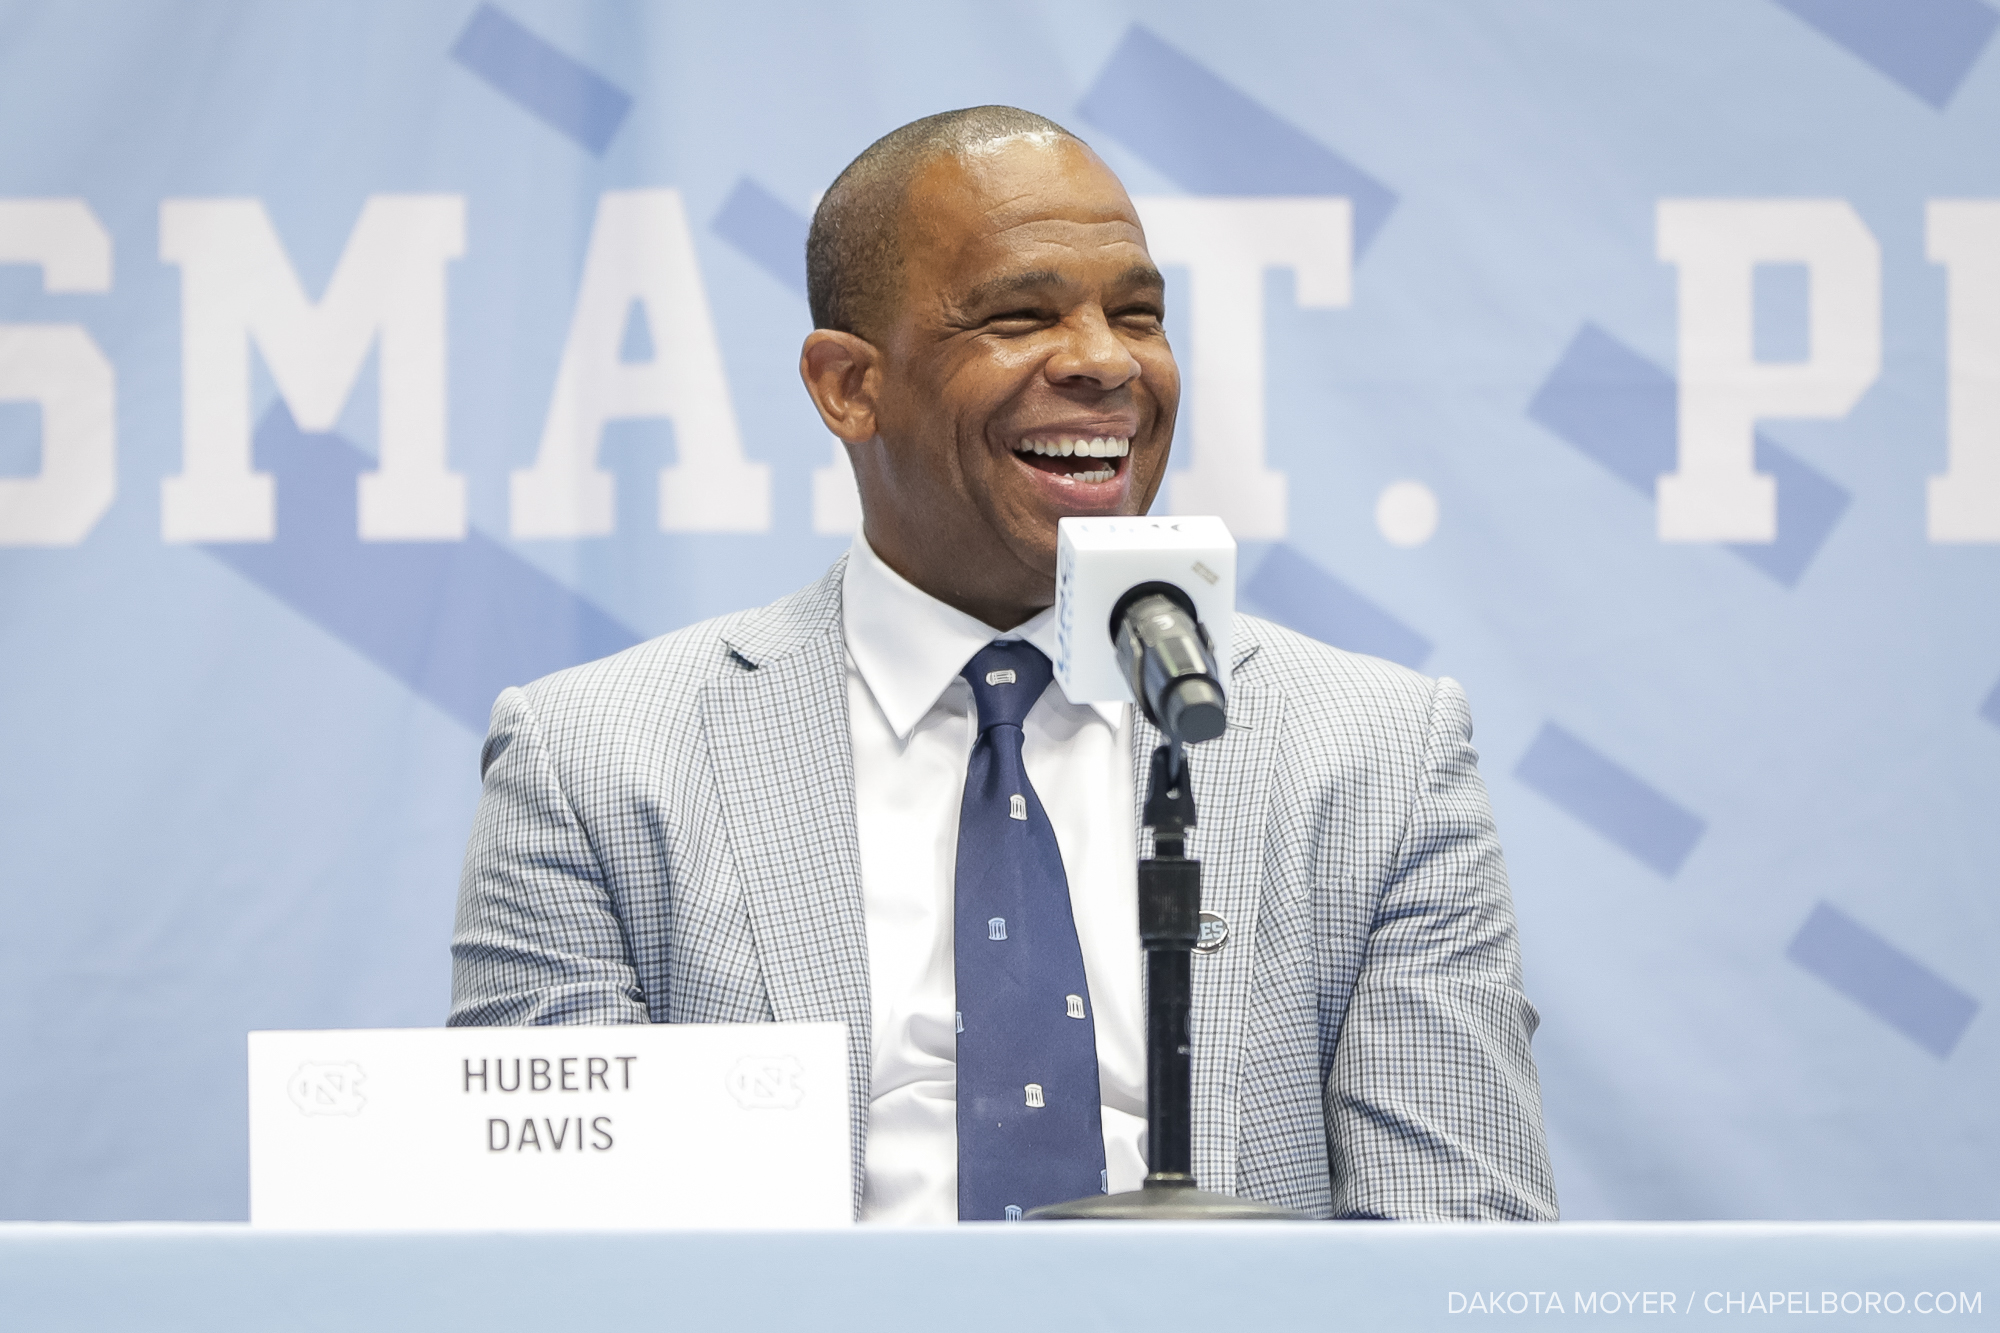 EXCLUSIVE: Hubert Davis Talks UNC Basketball, Recruiting and His Transition  as Head Coach 